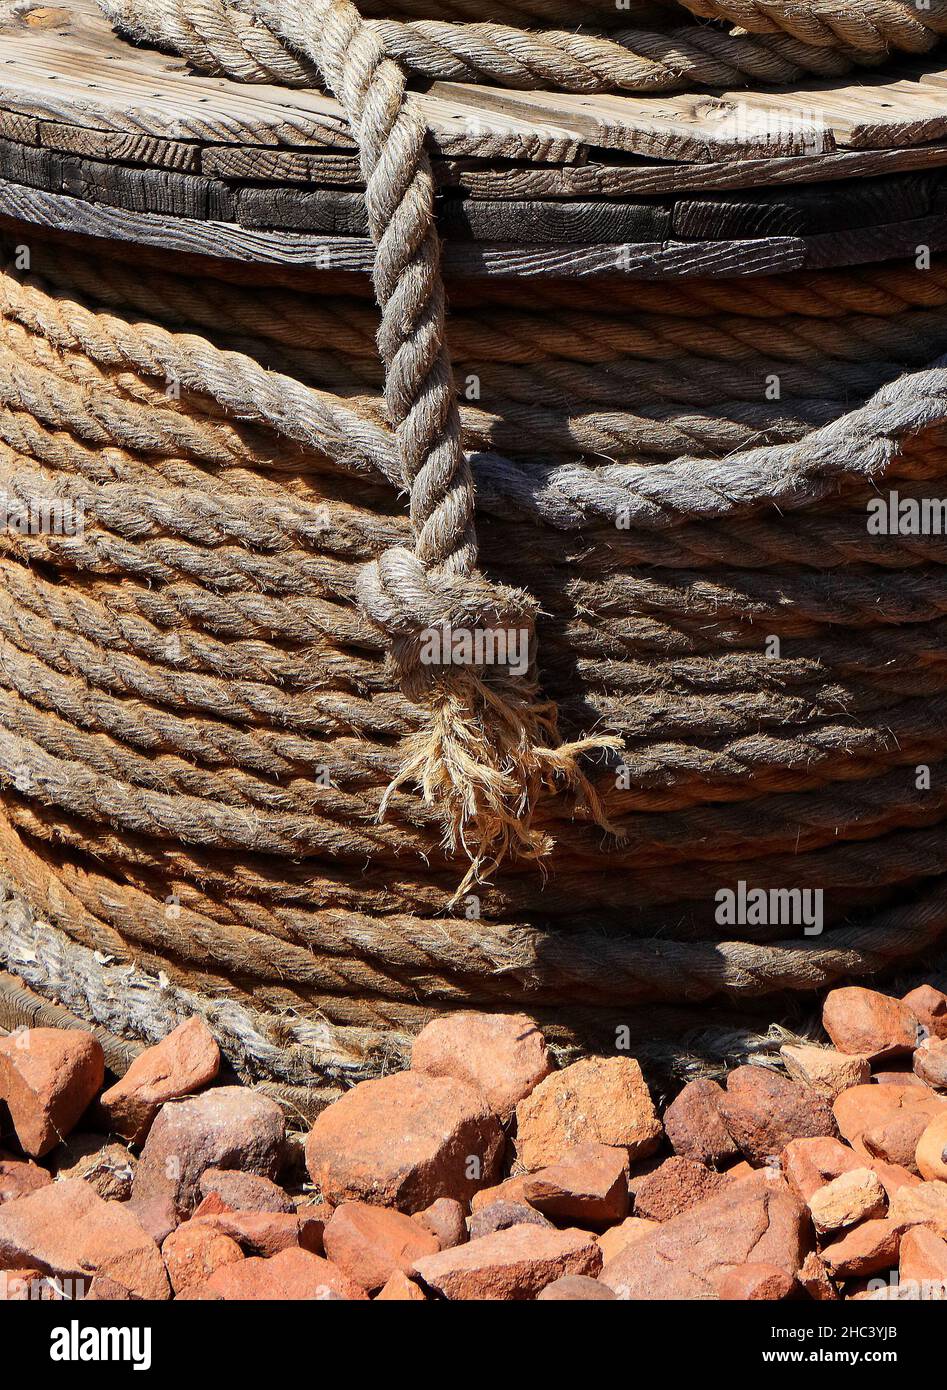 Vertical shot of interwoven wool ropes Stock Photo